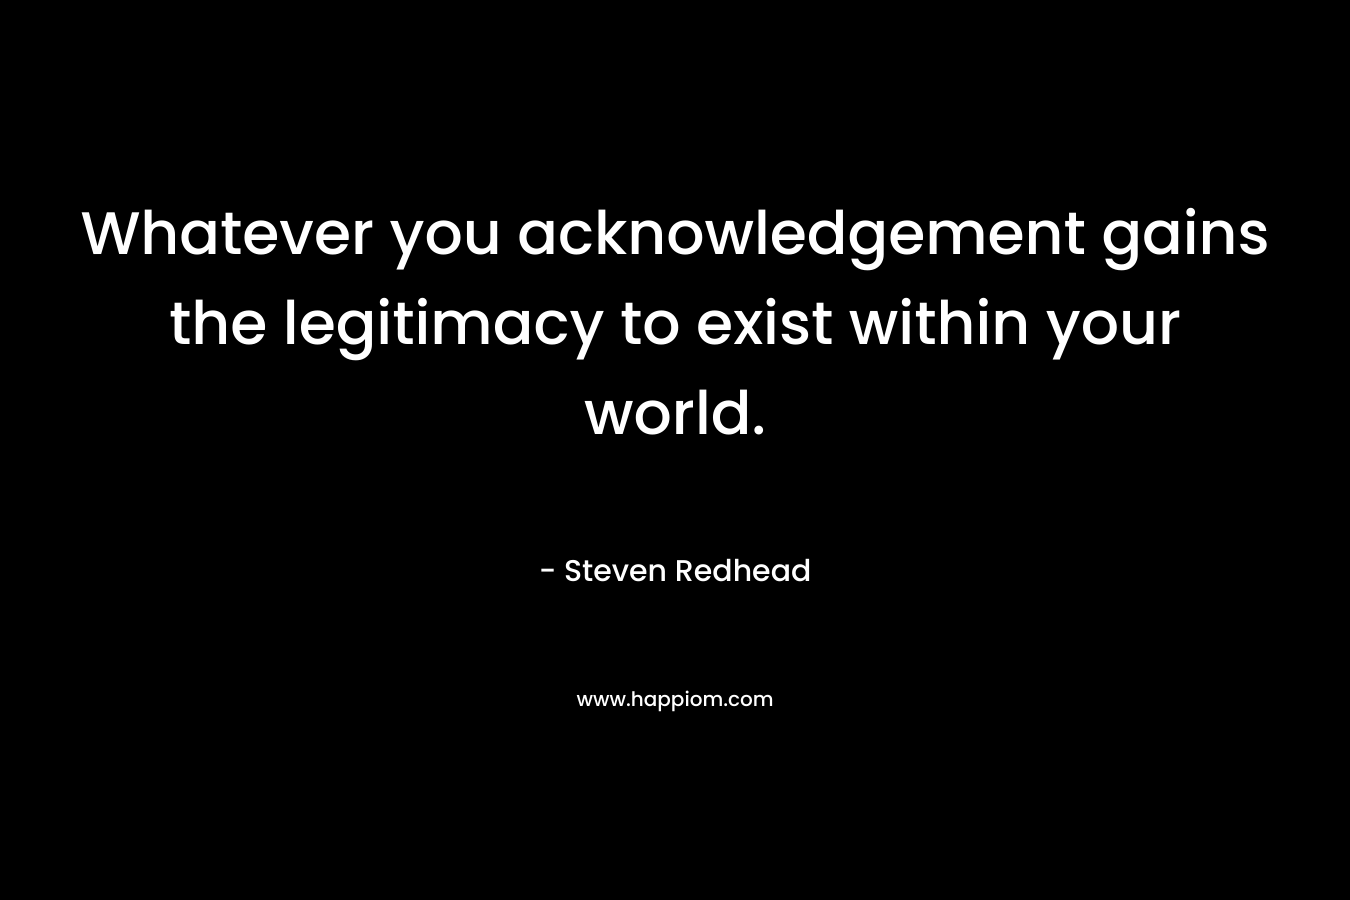 Whatever you acknowledgement gains the legitimacy to exist within your world.